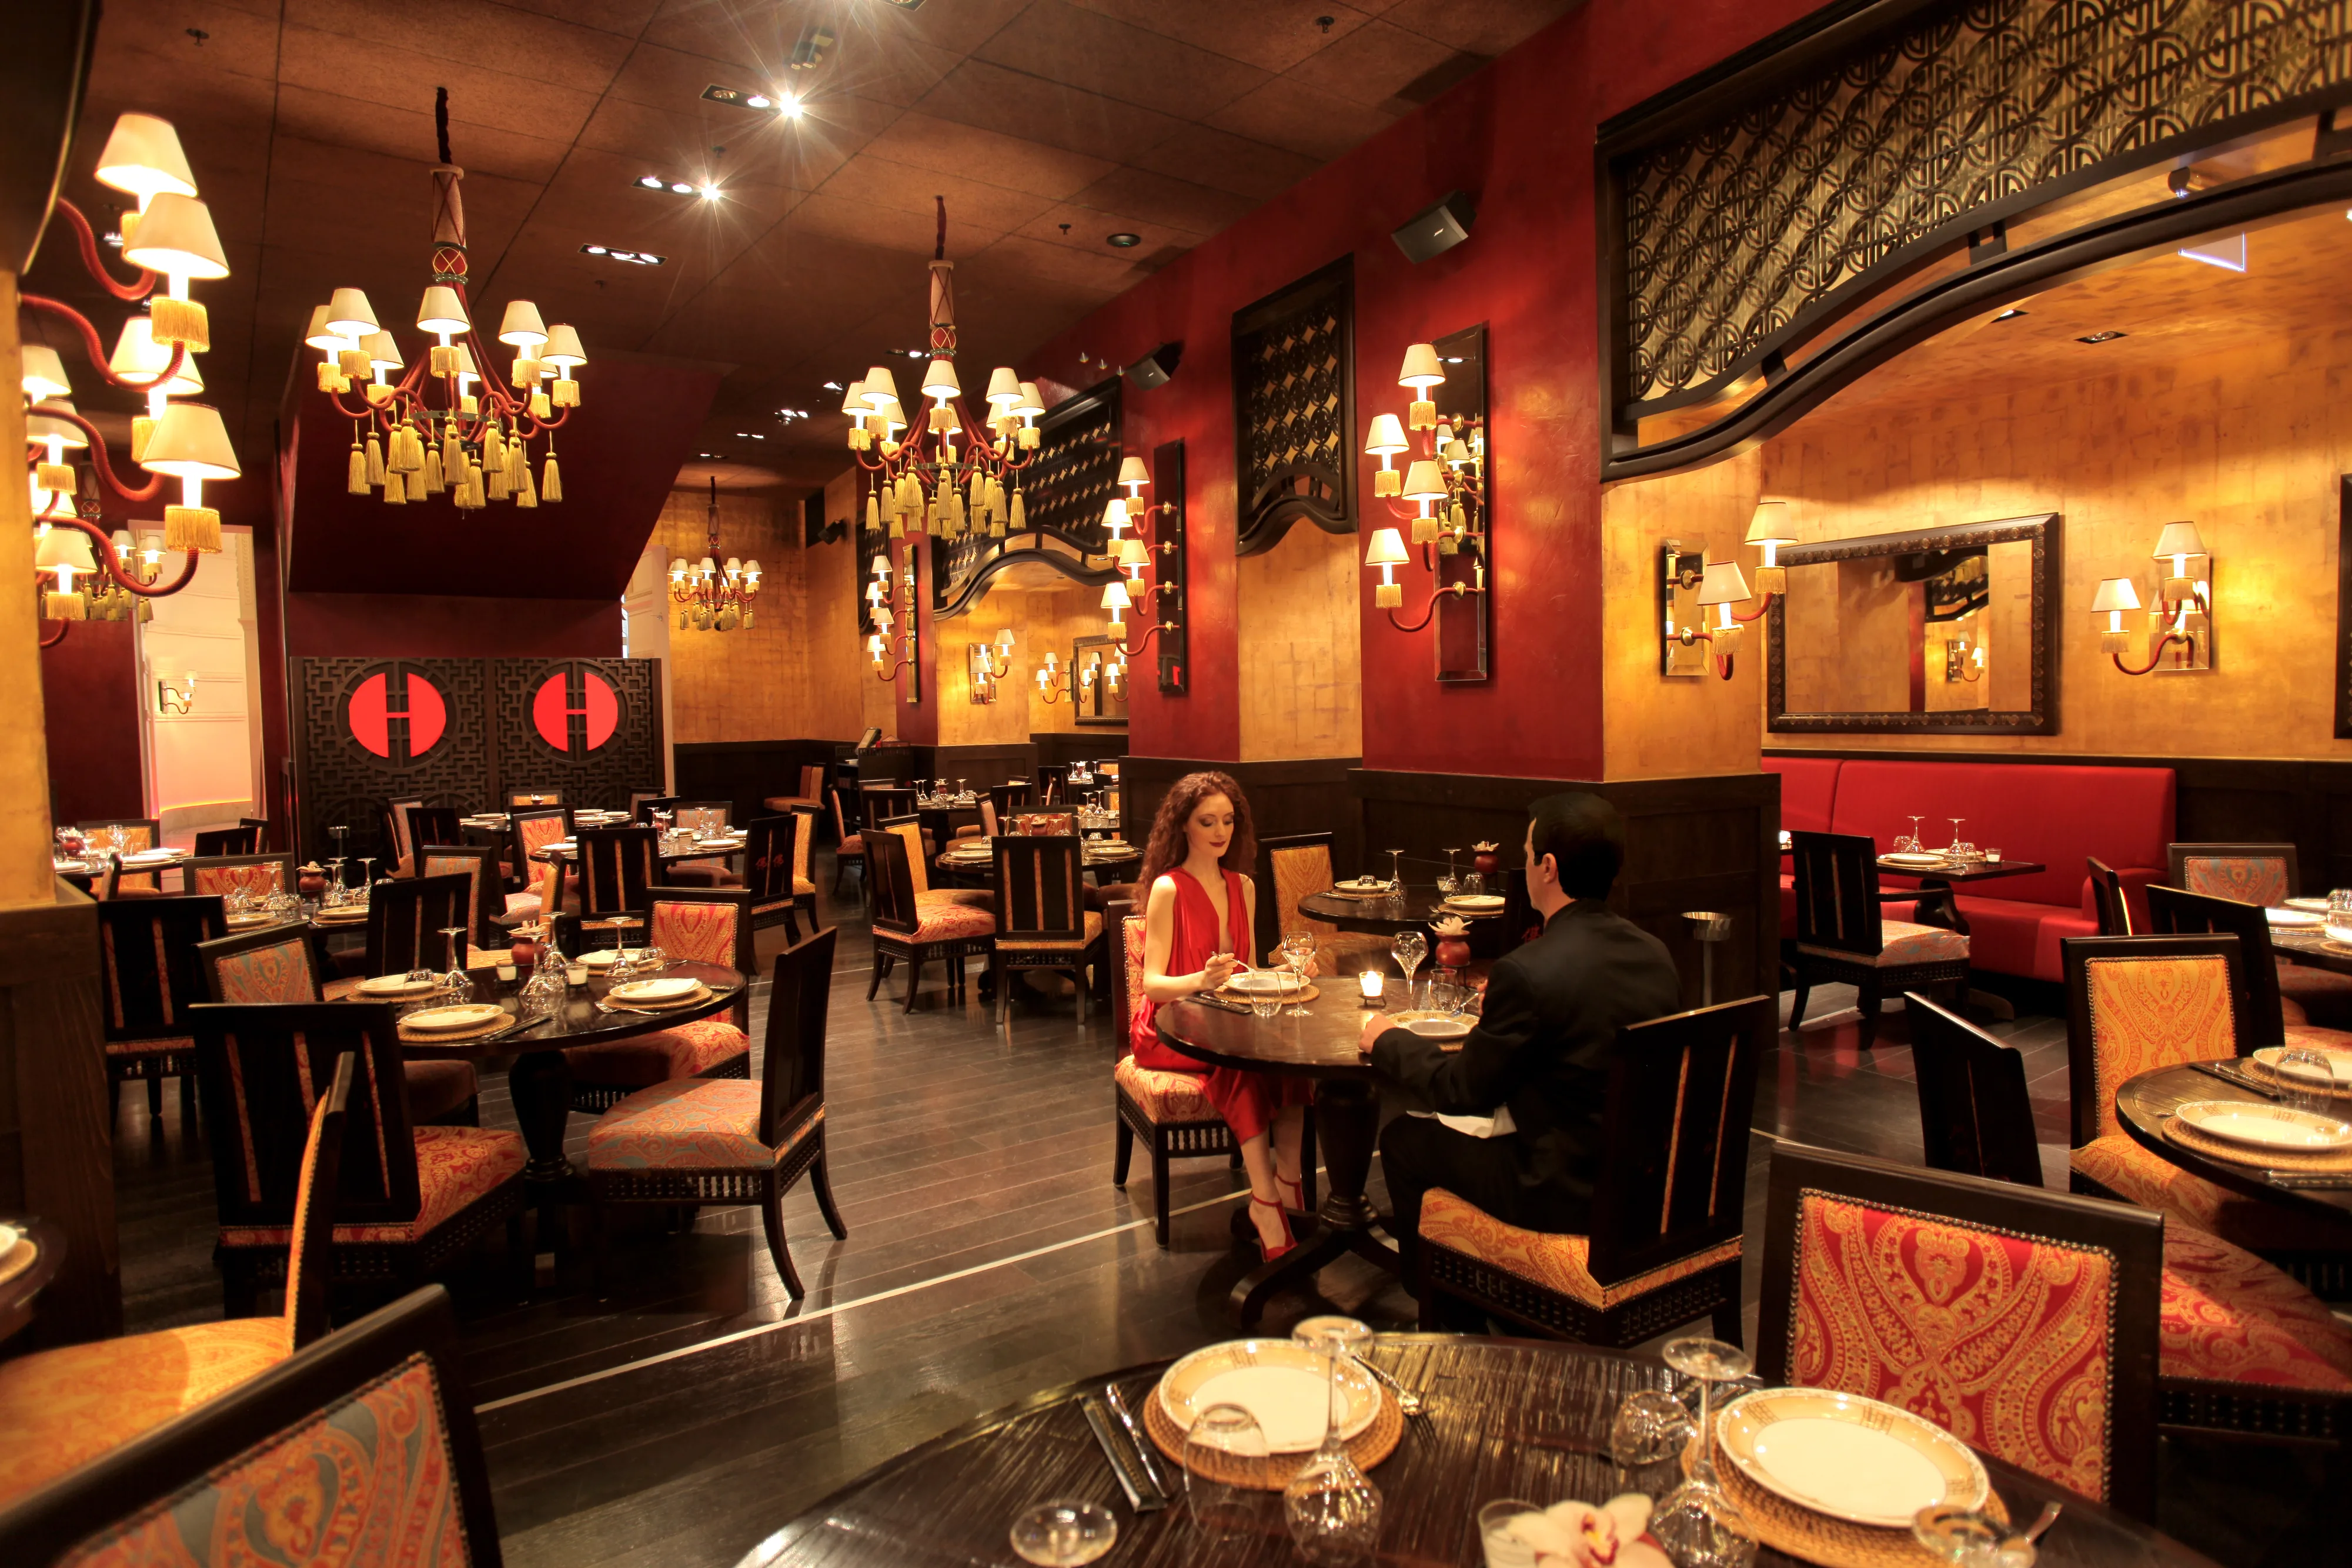 How Interior Designing Plays An Important Role in Making a Restaurant